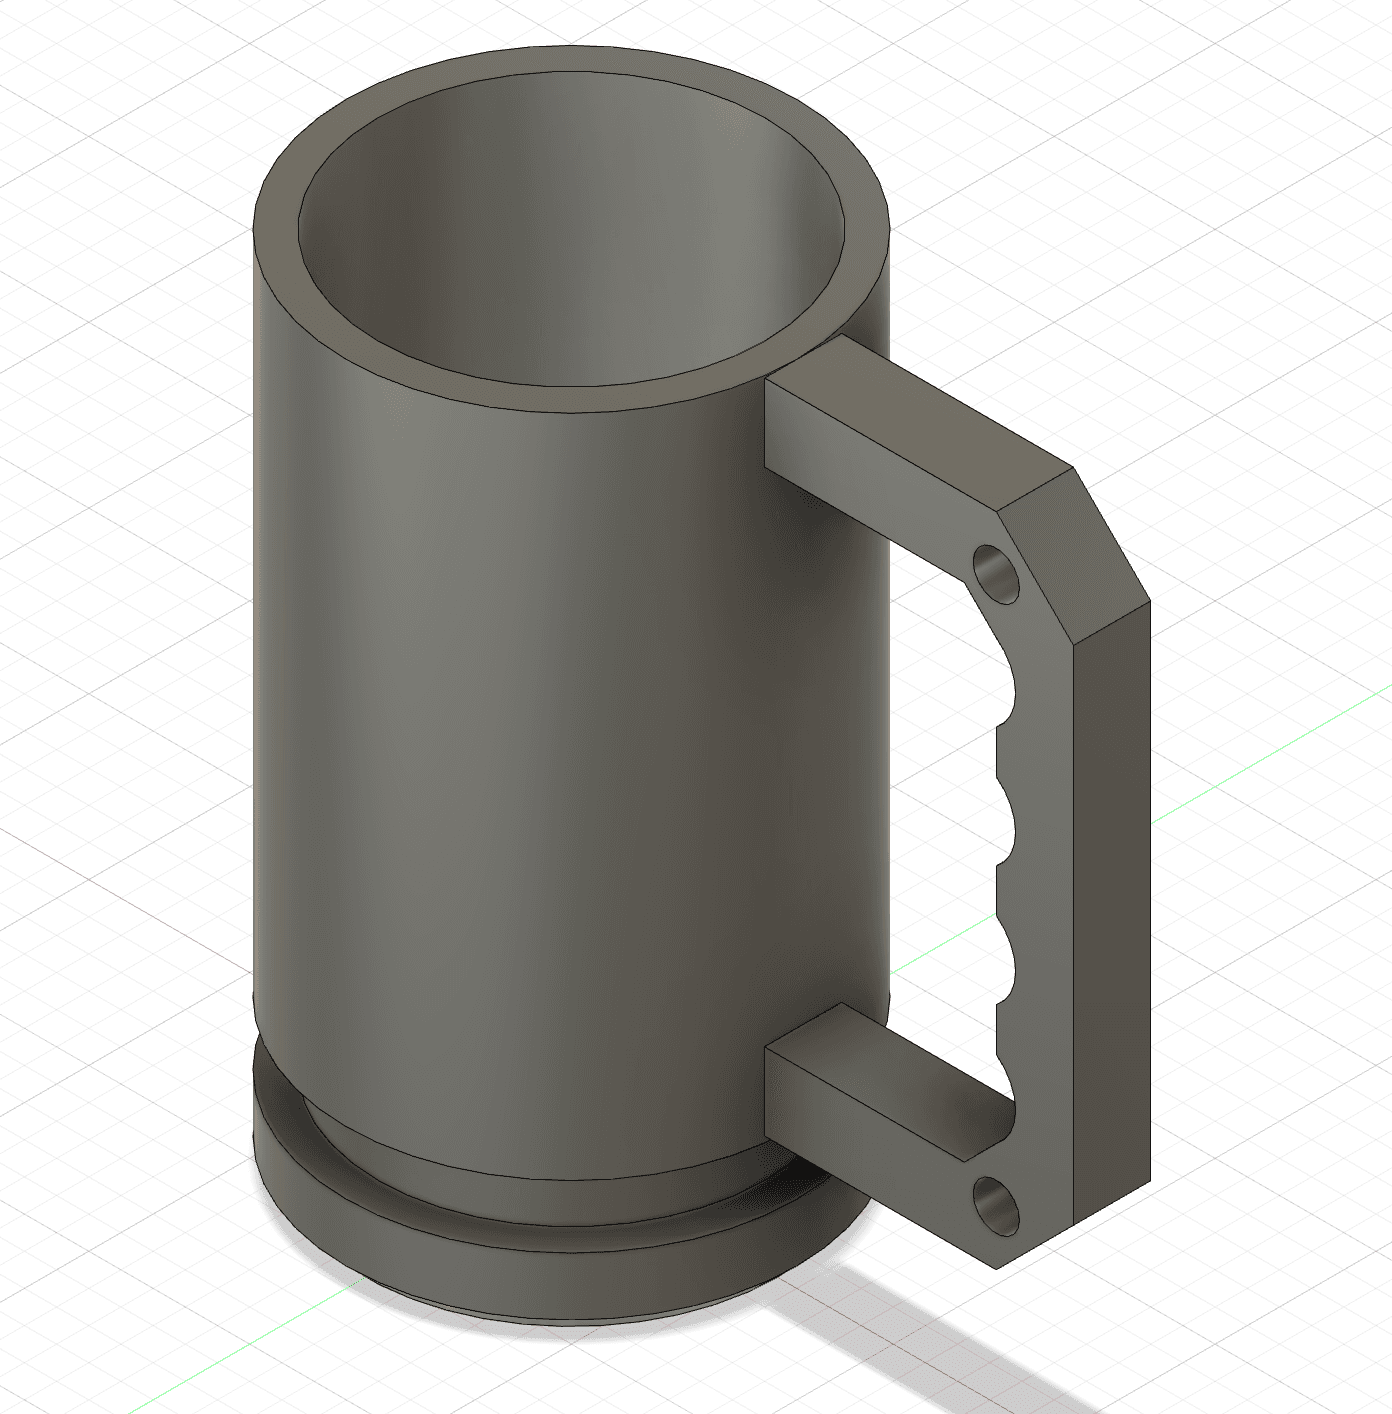 70mm shell koozie in the works